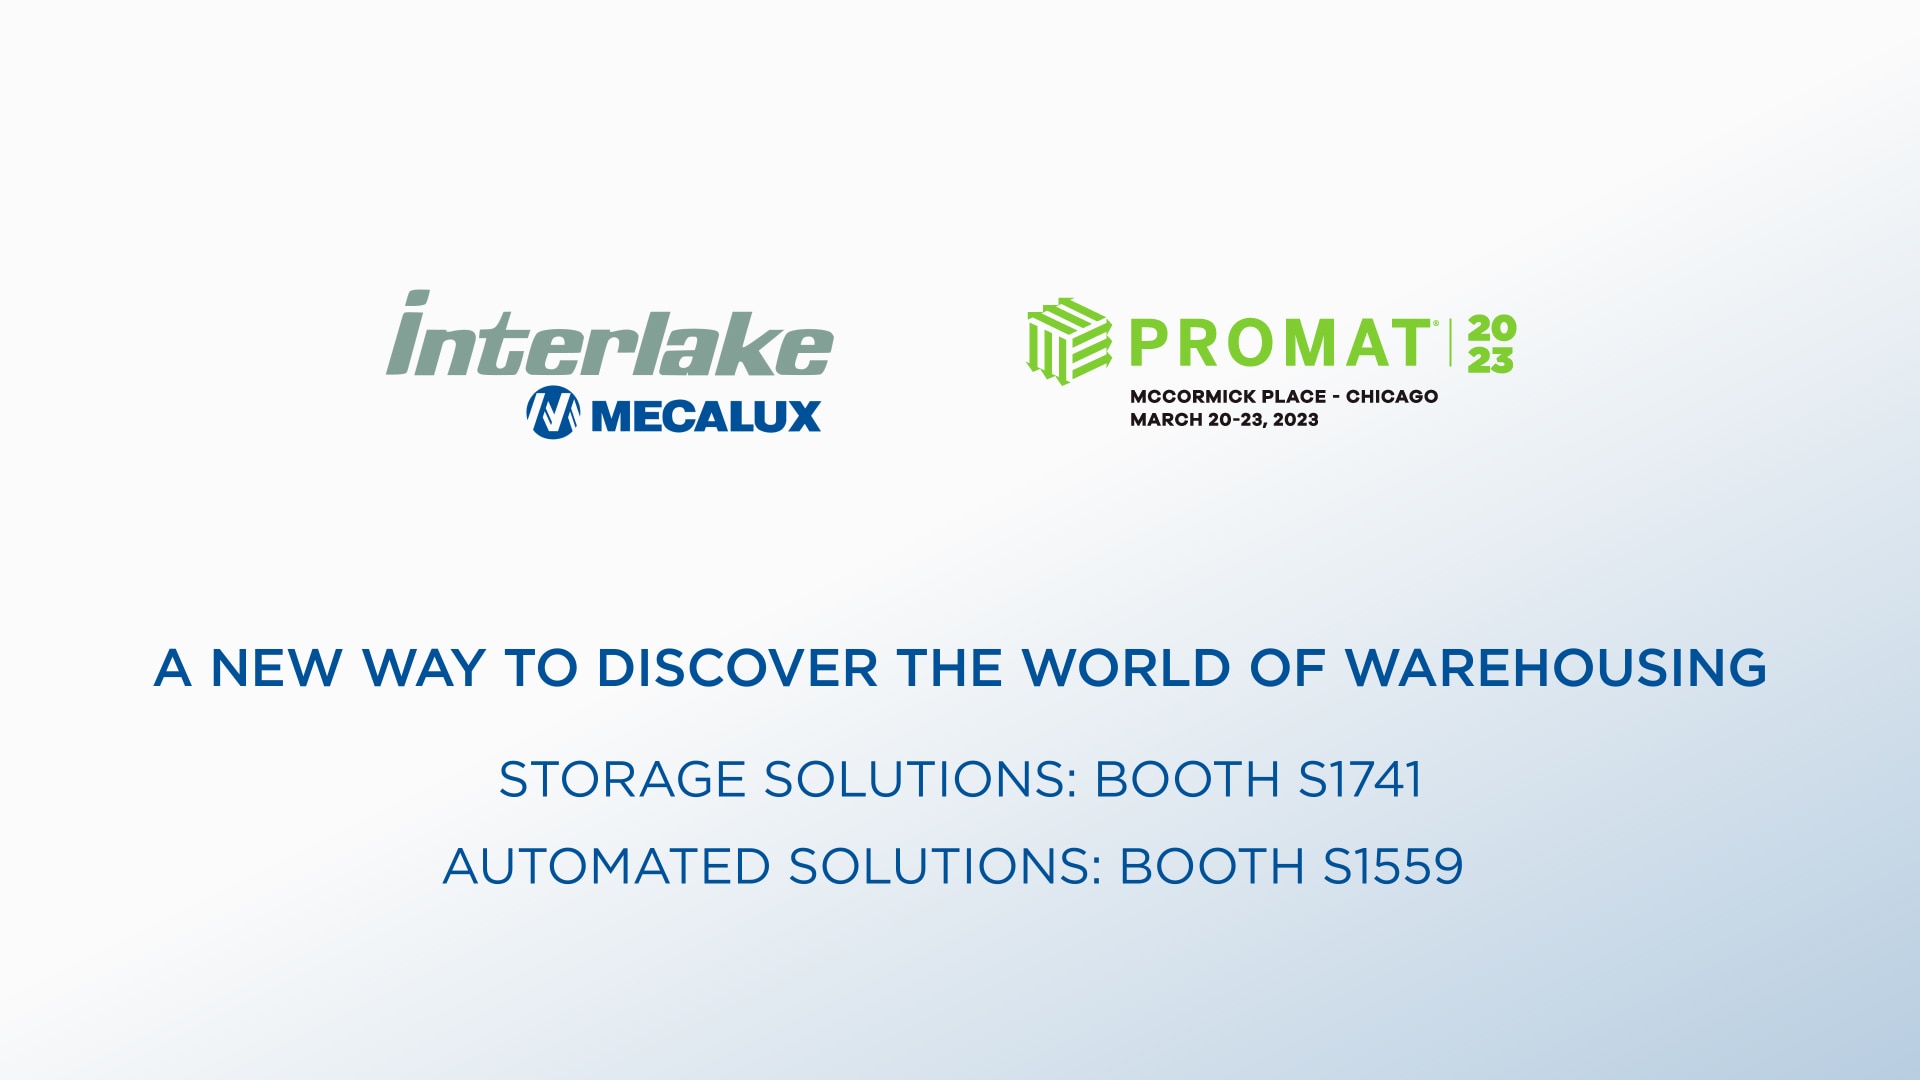 Interlake Mecalux to attend the ProMat 2023